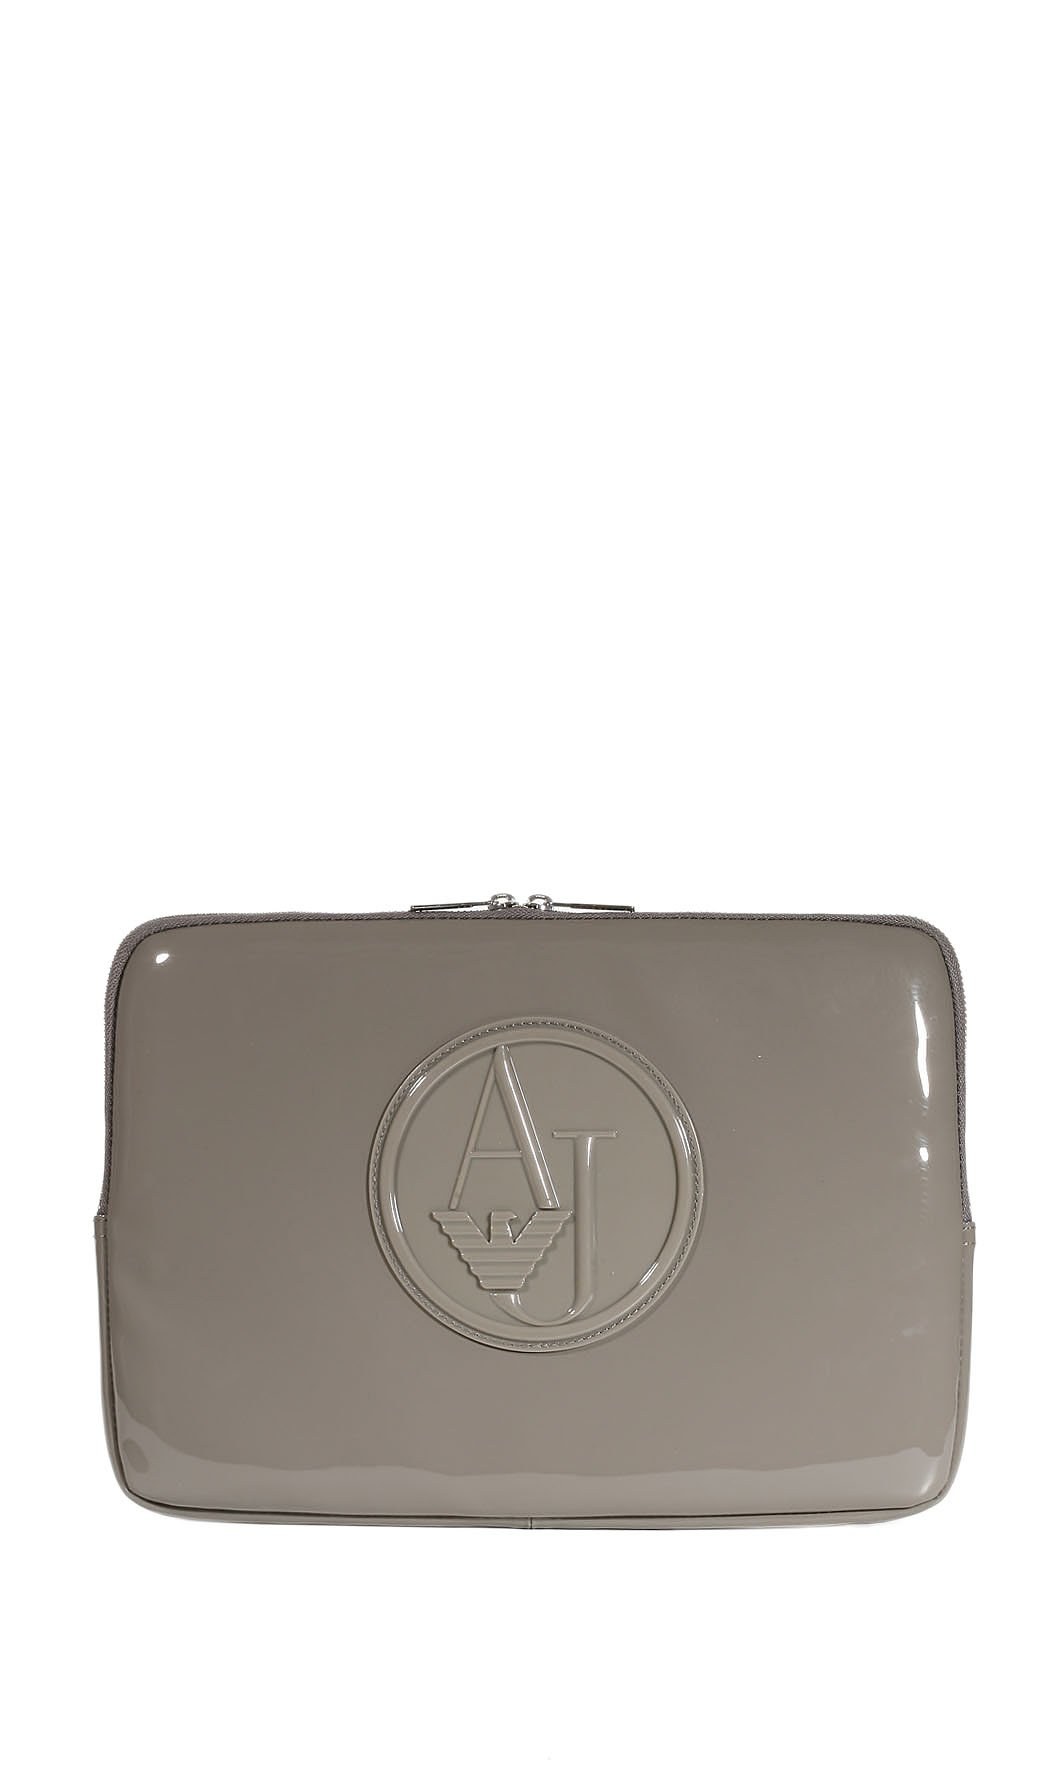 Armani Jeans Bag Patent Leather Clutch in Gray (grey) | Lyst